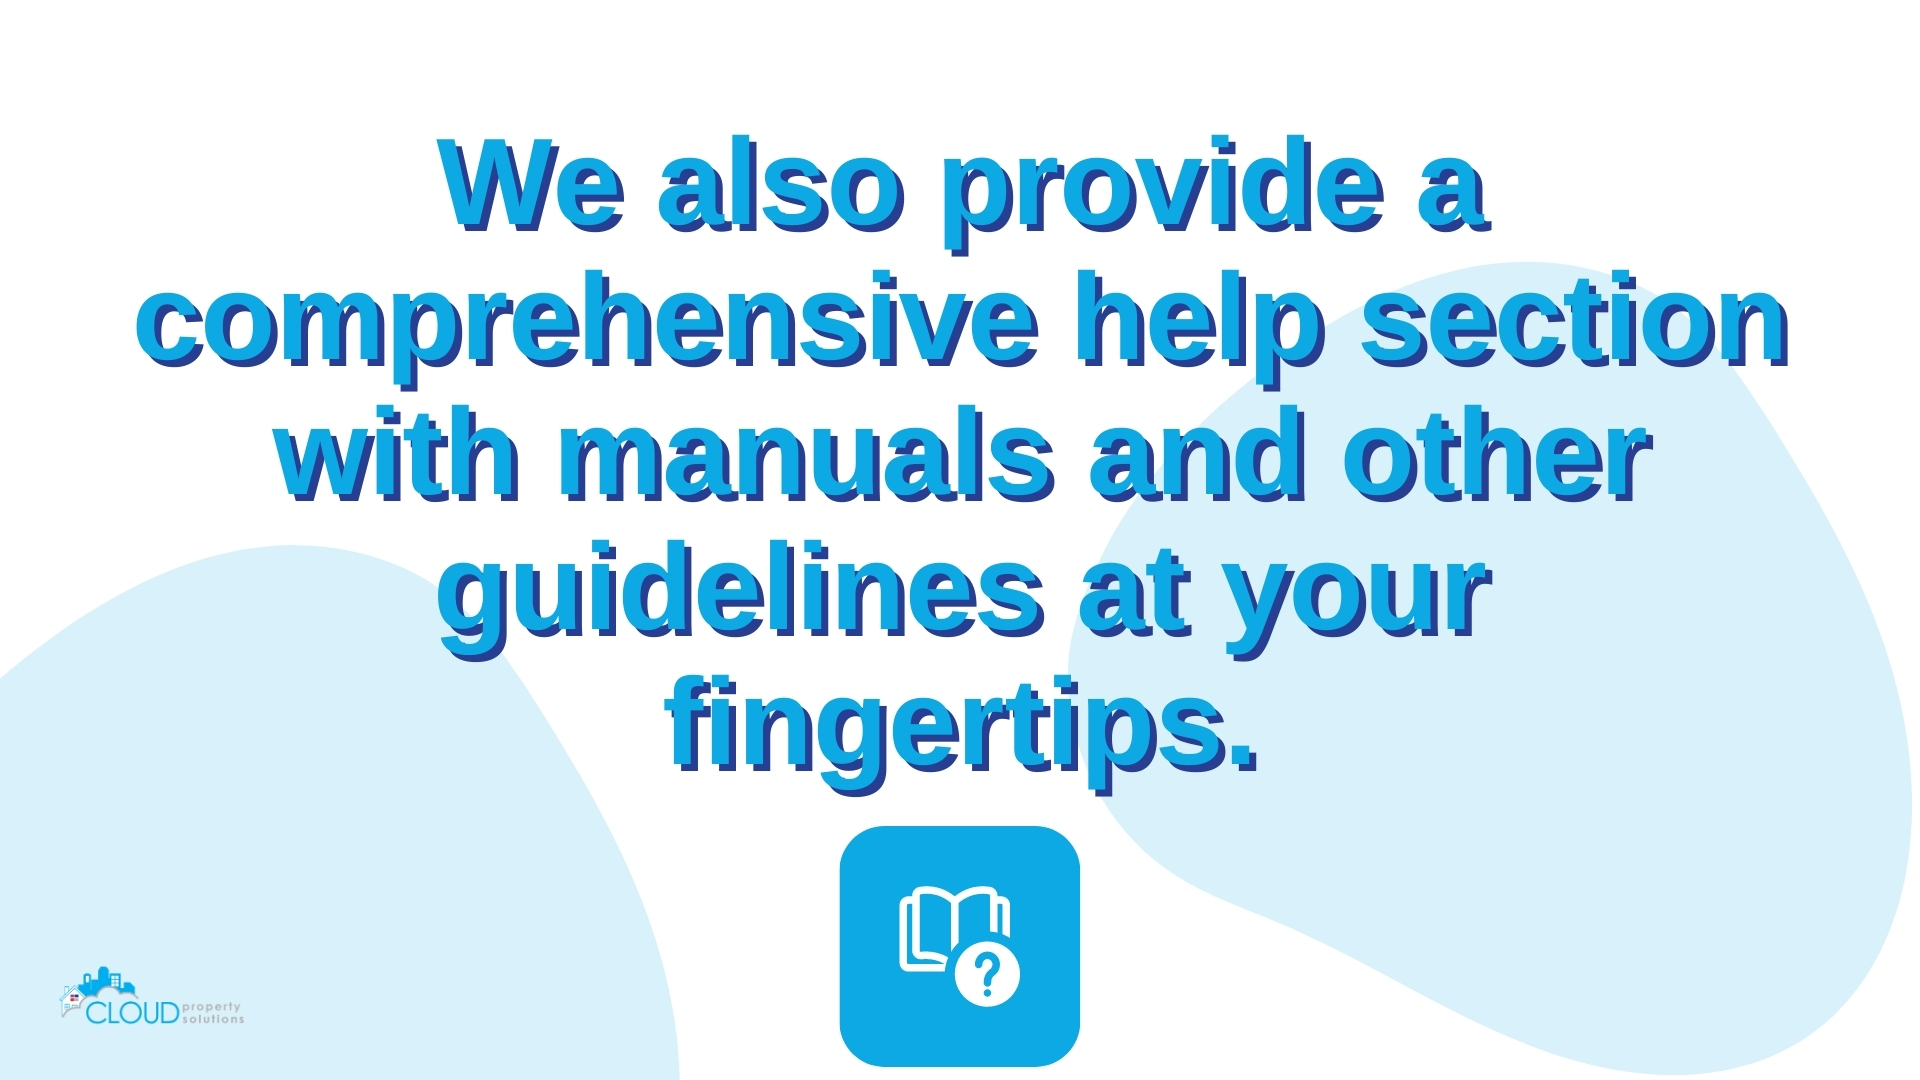 The Online Help Manuals are available through the system for quick and easy access.